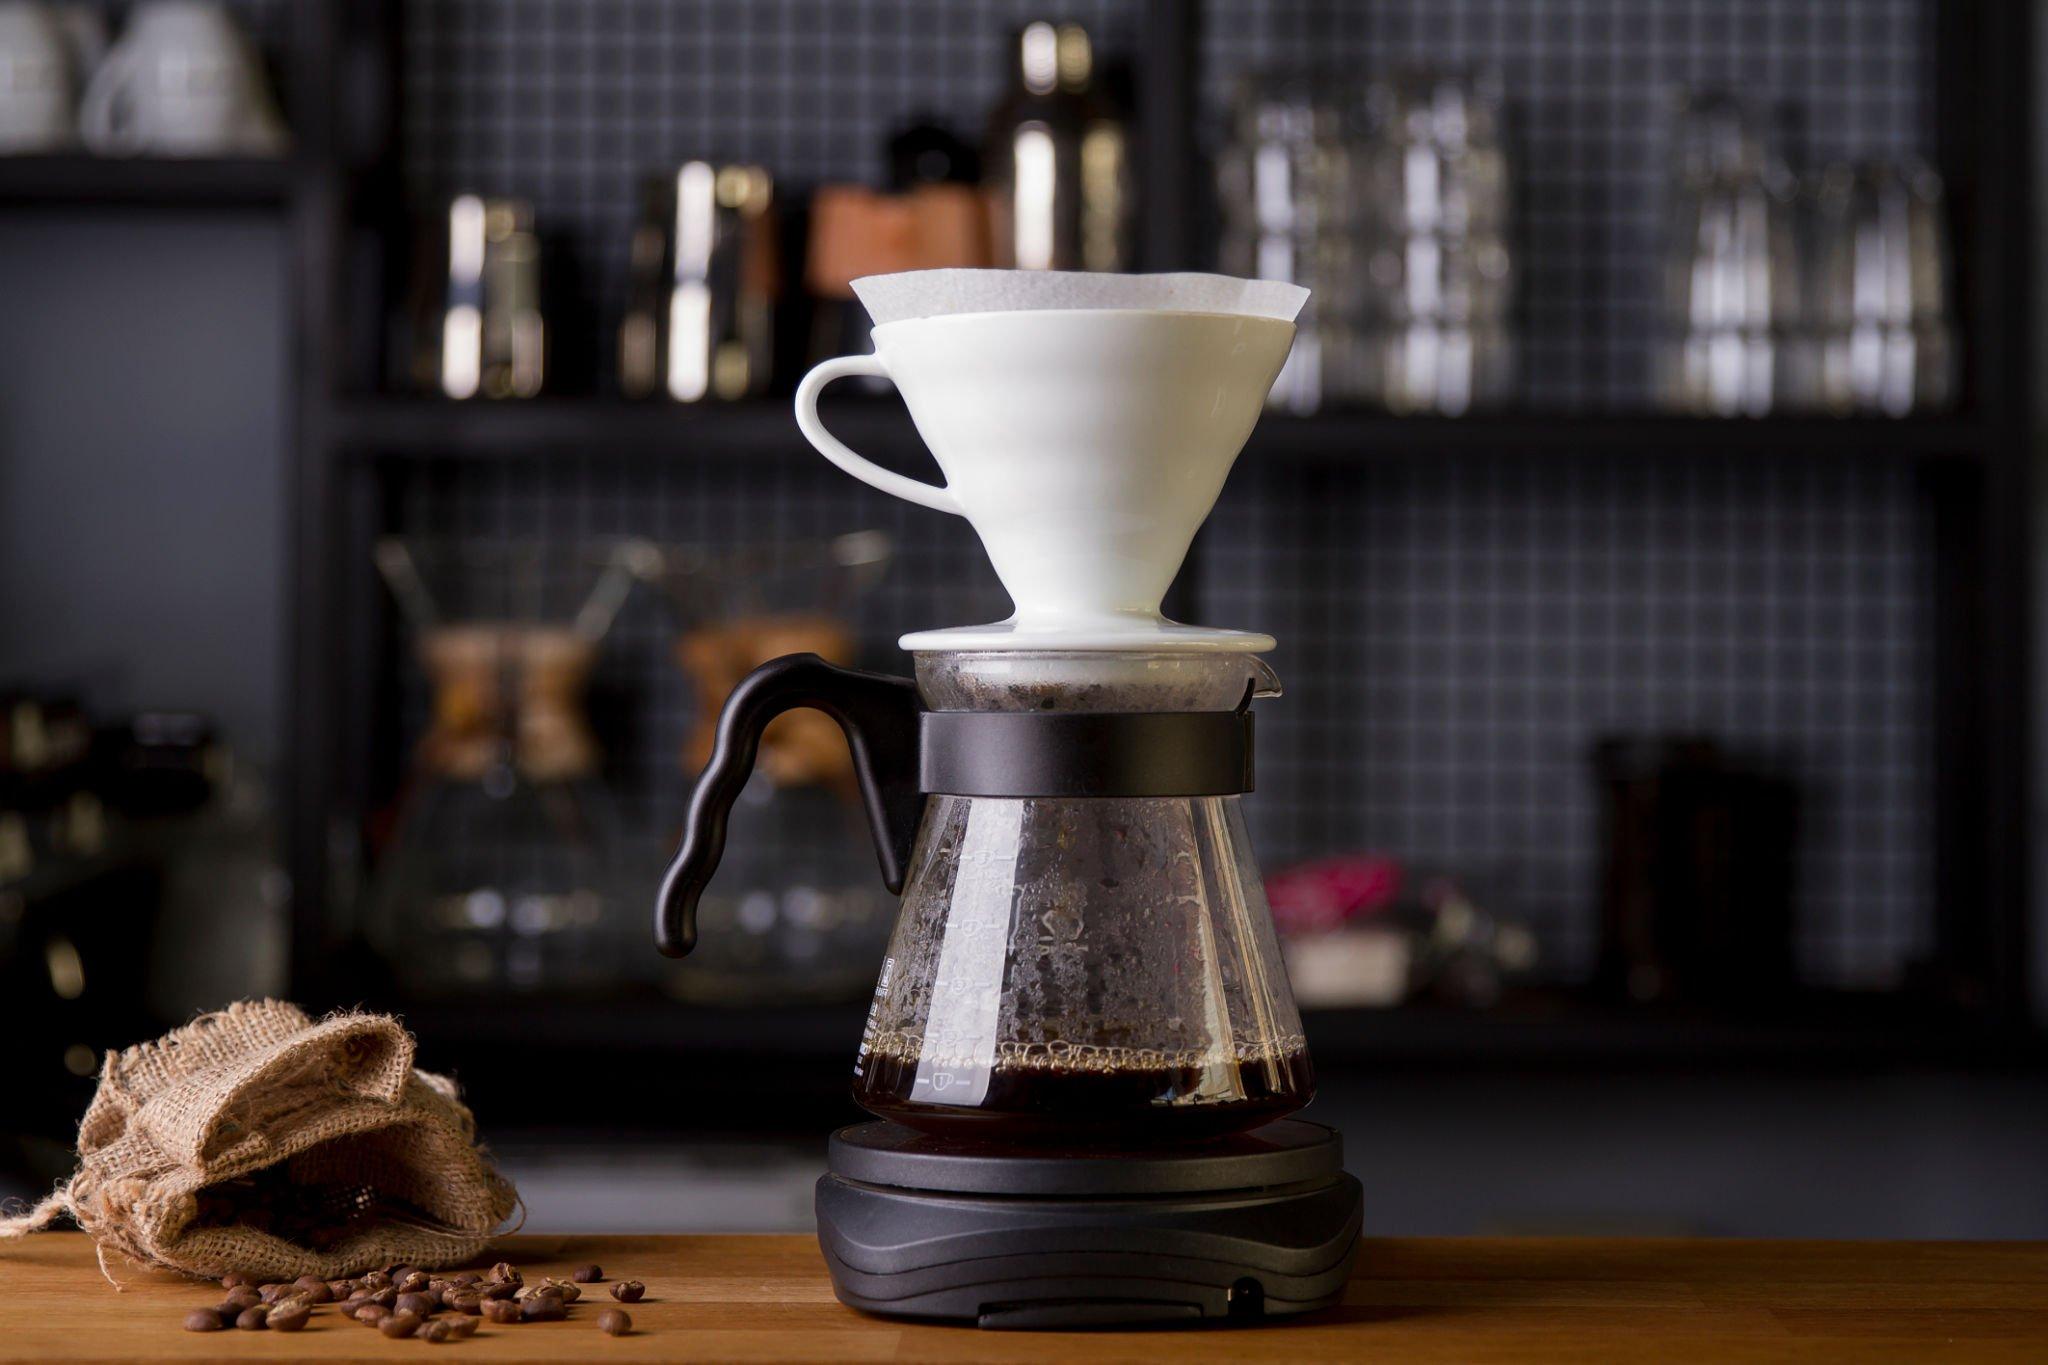 Which Pour-Over Coffee Maker Is Best: Hario V60 or Kalita Wave?